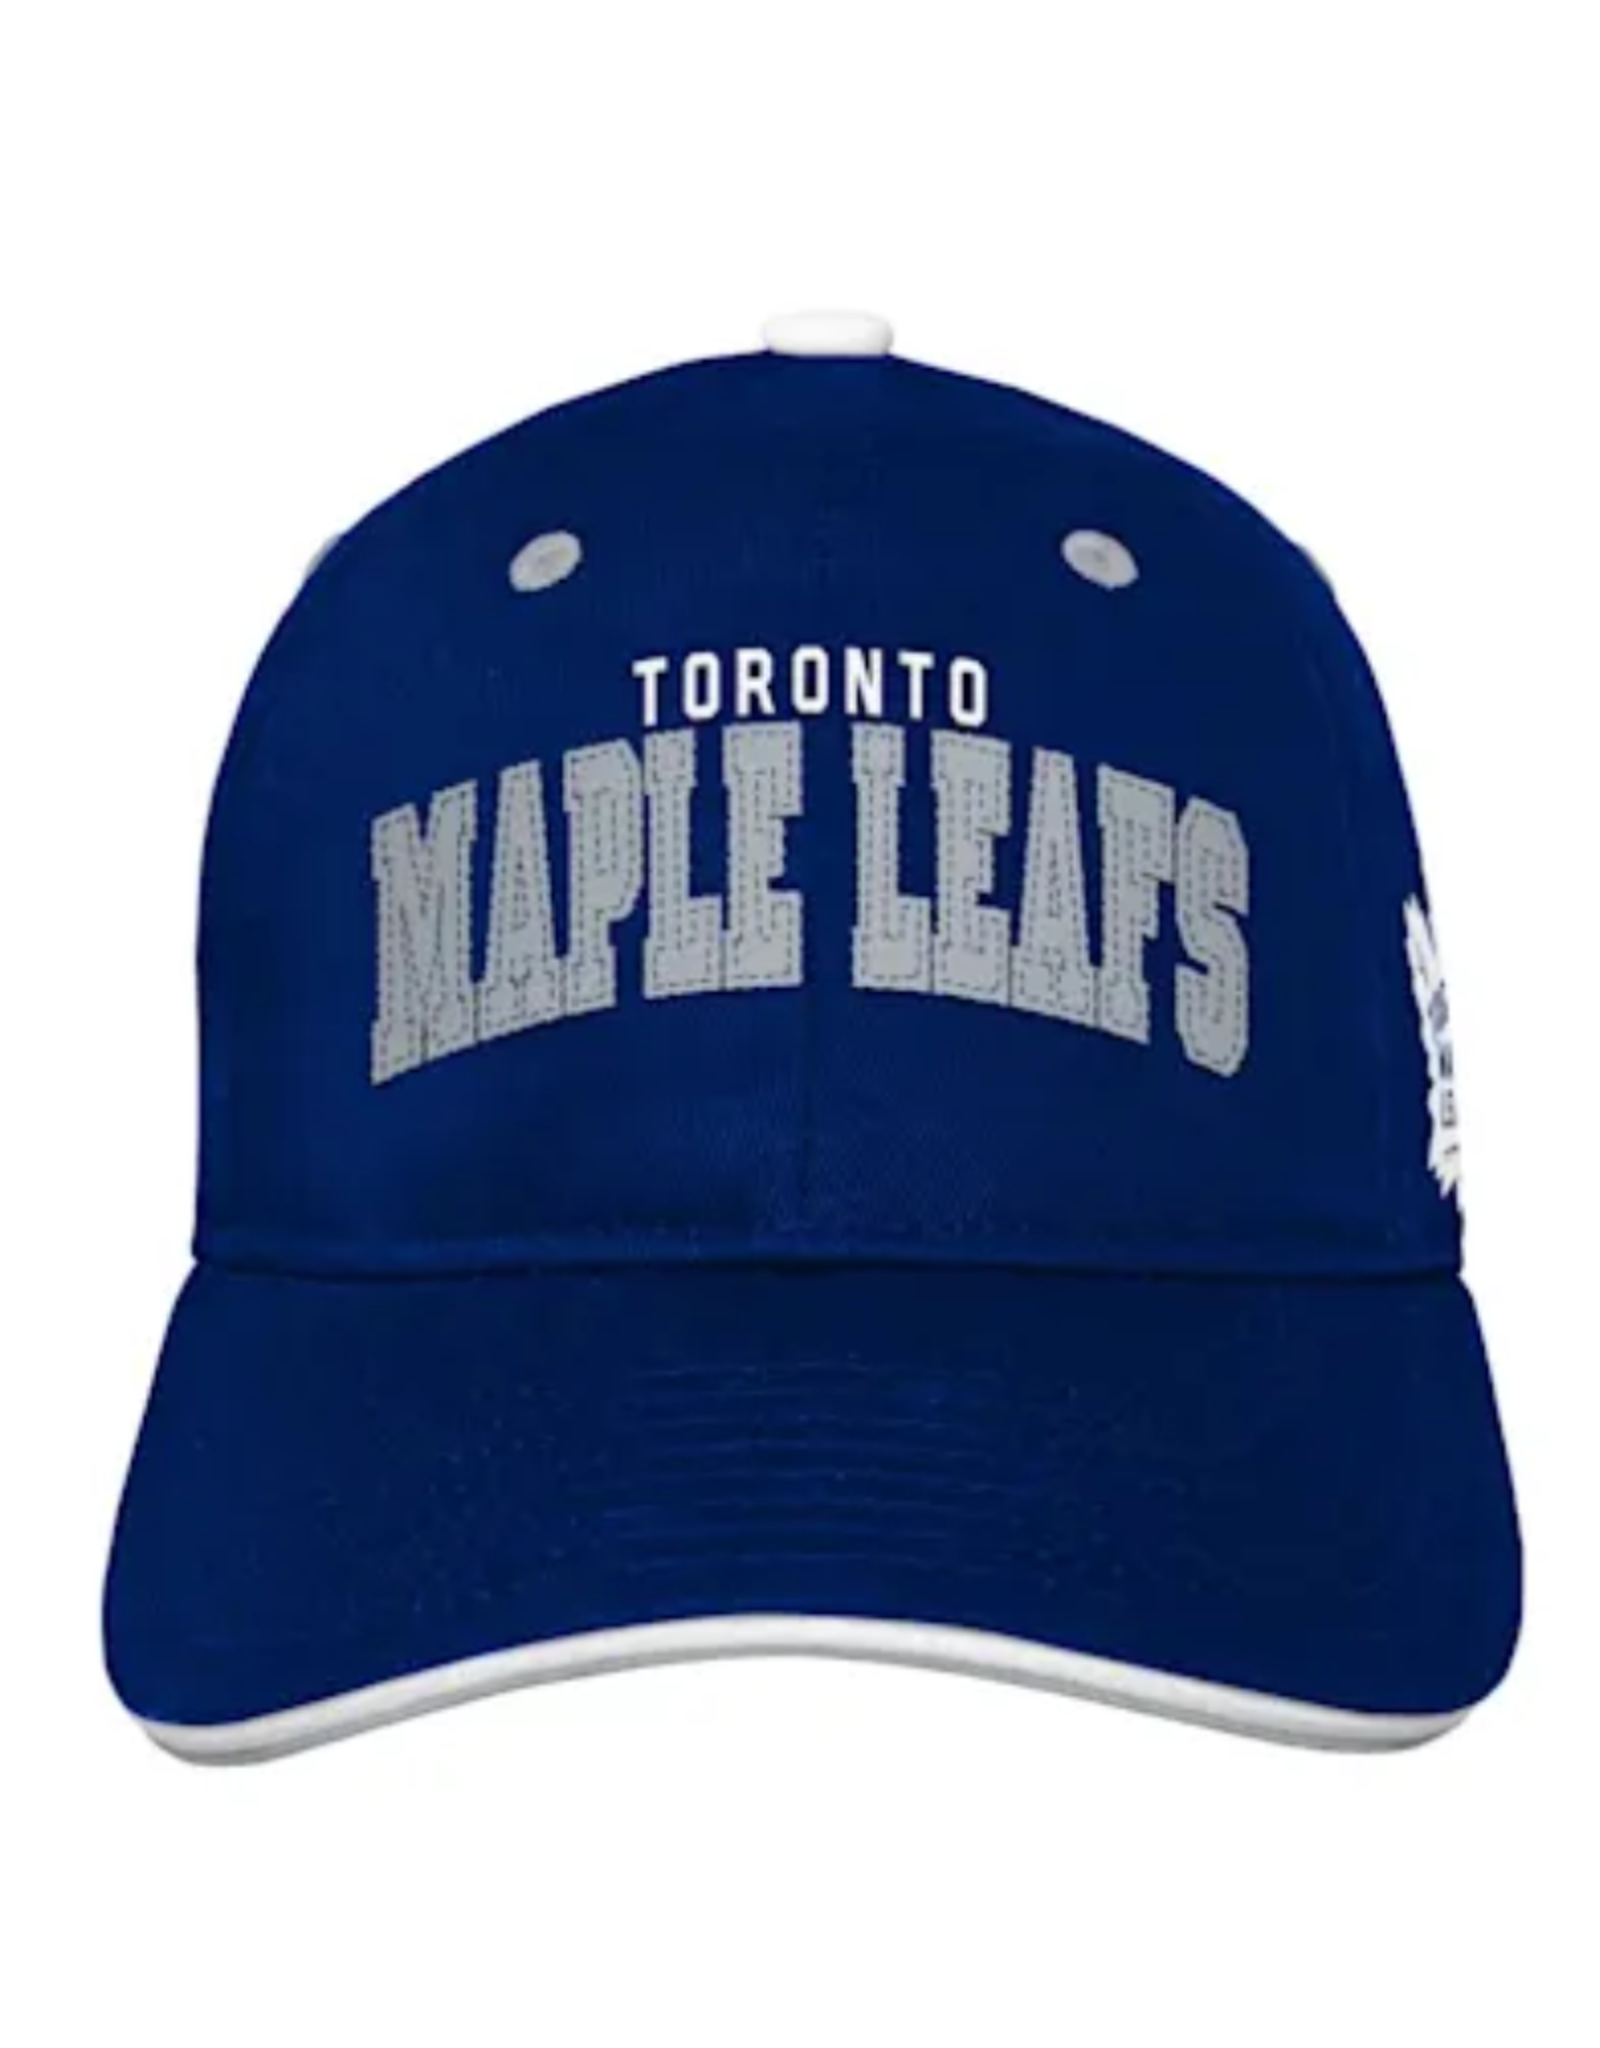 Outerstuff Youth Collegiate Arch Adjustable Hat Toronto Maple Leafs